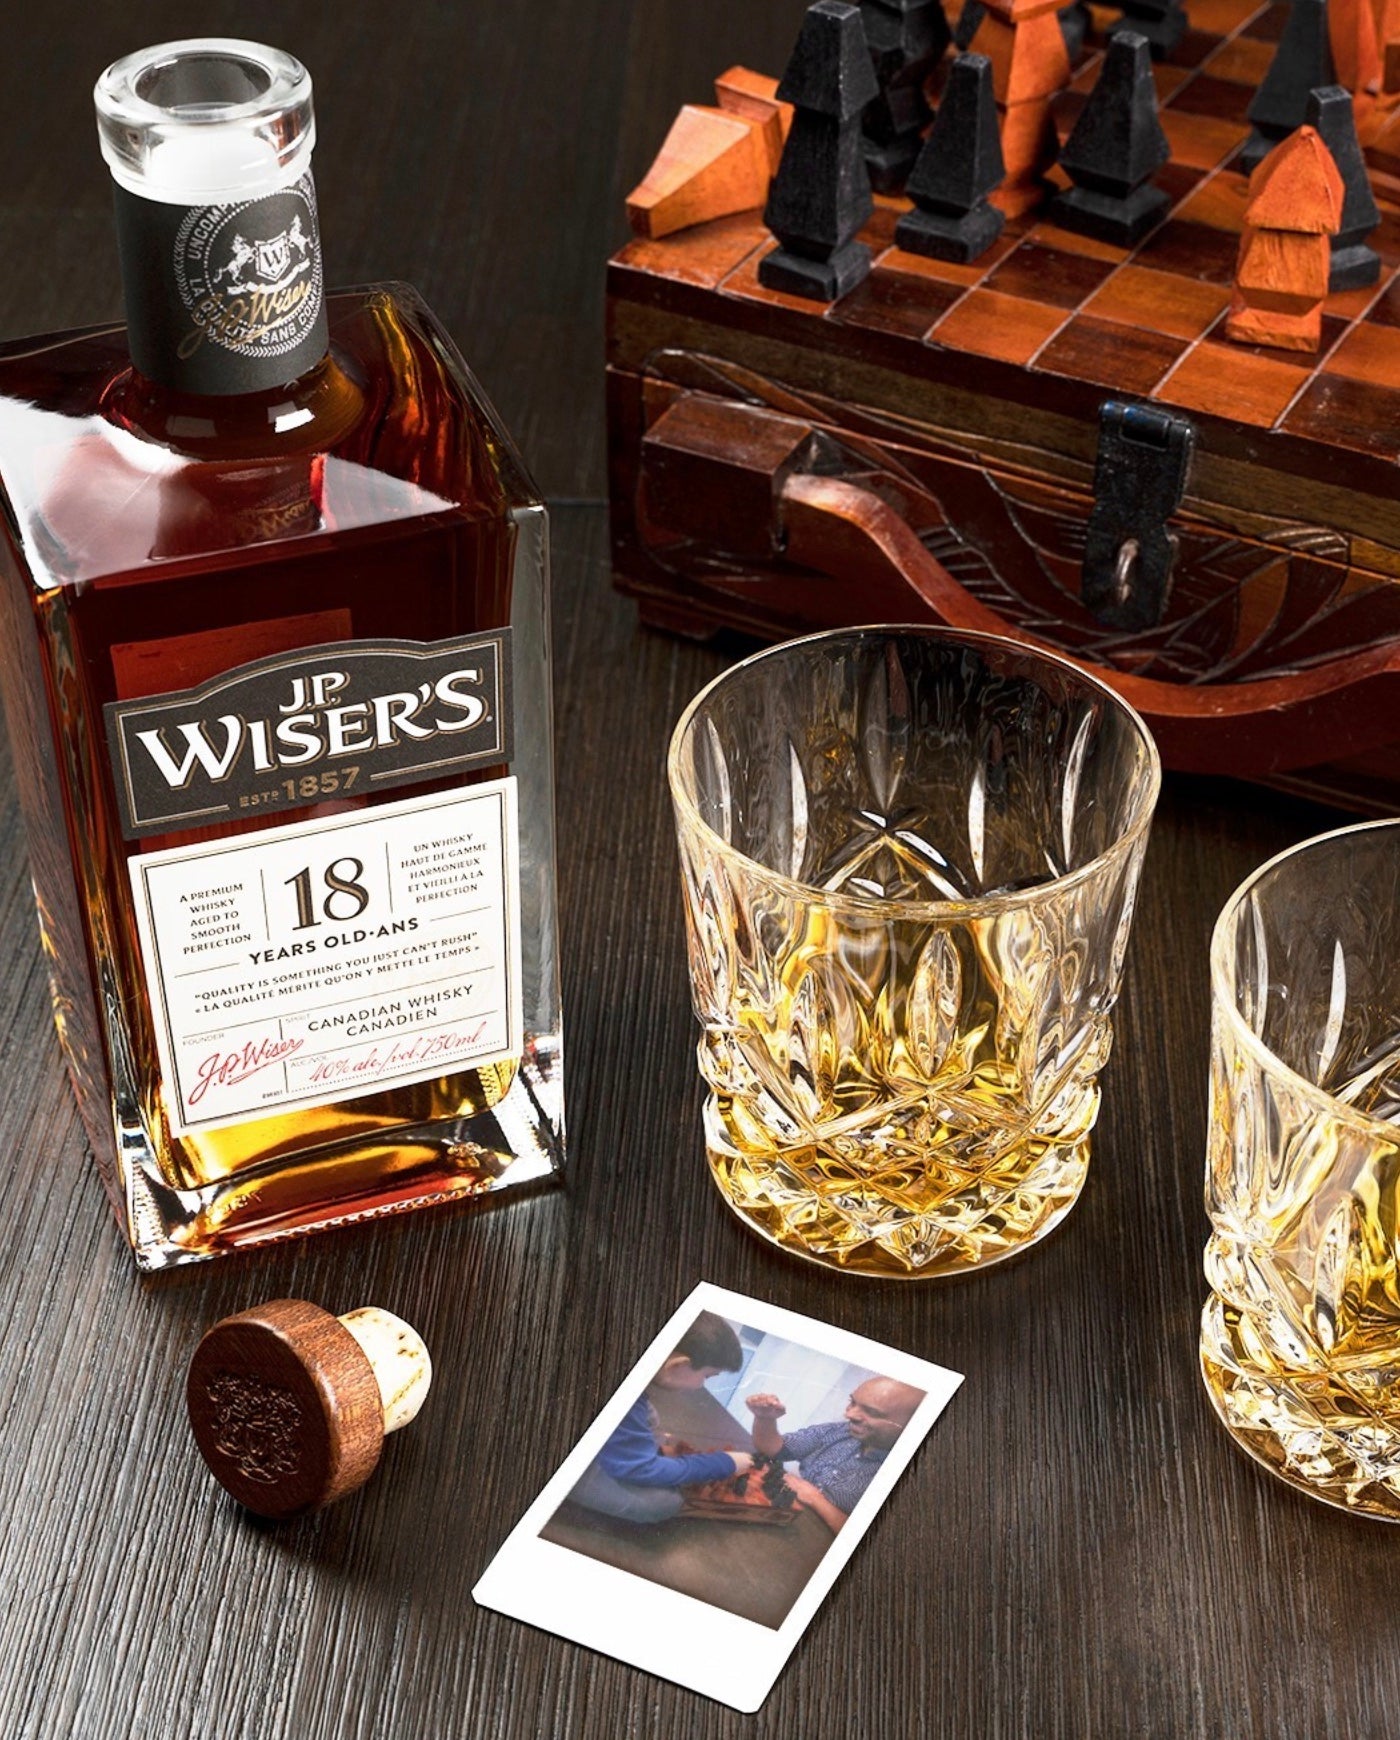 JP Wiser’s 18 Year Old Canadian Whisky